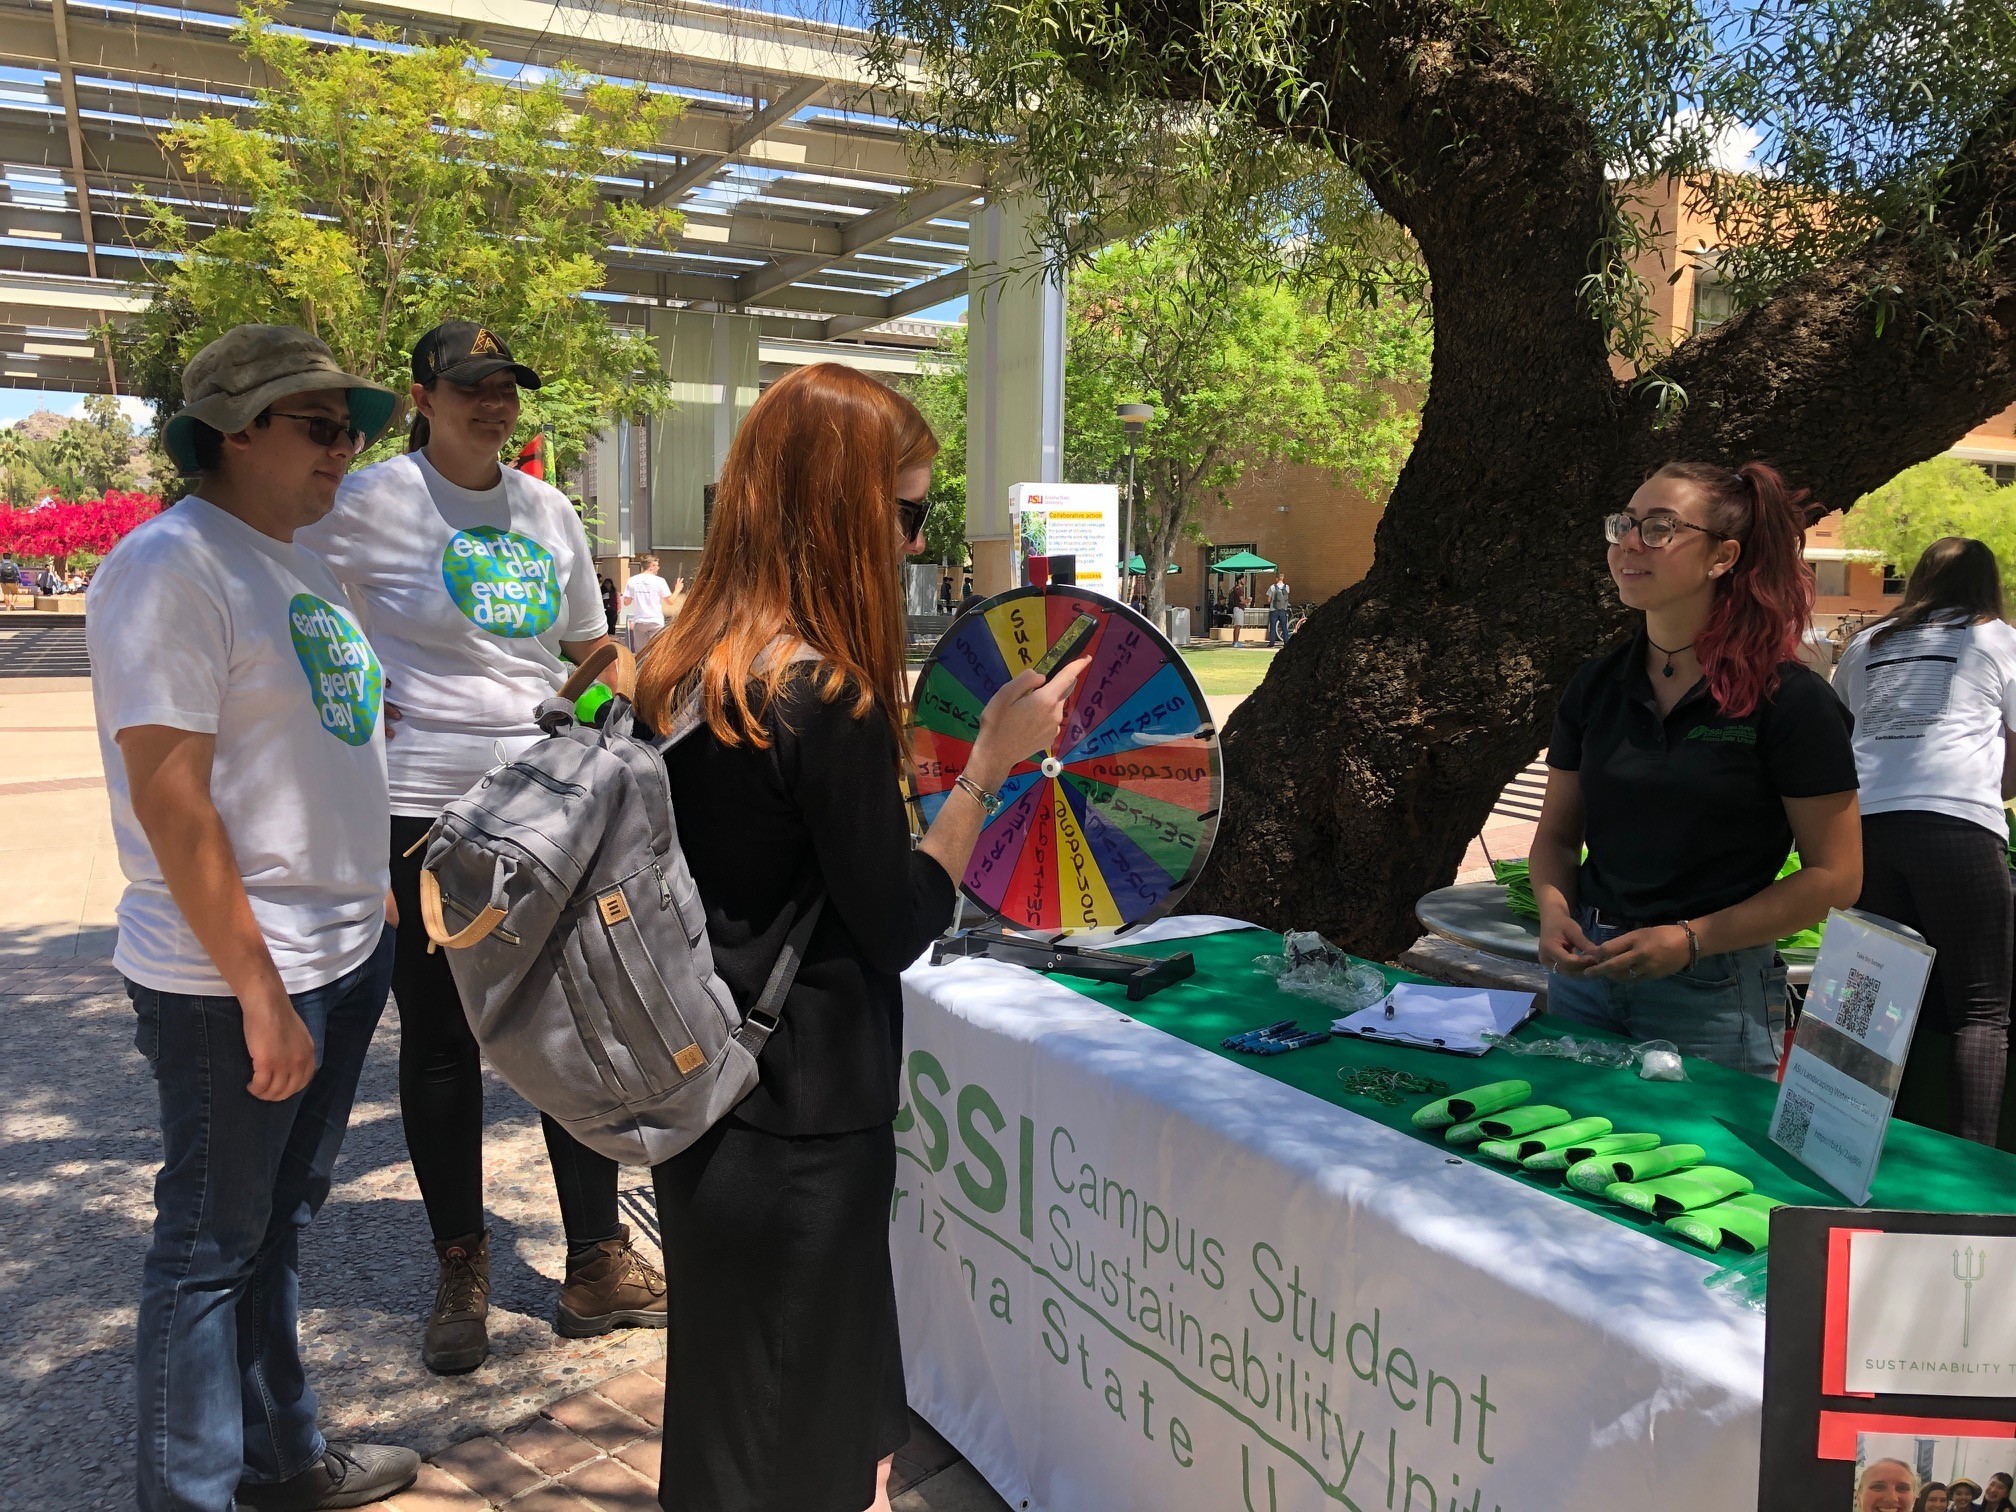 The Campus Student Sustainability Initiative works at a tabling event on the tempe campus.